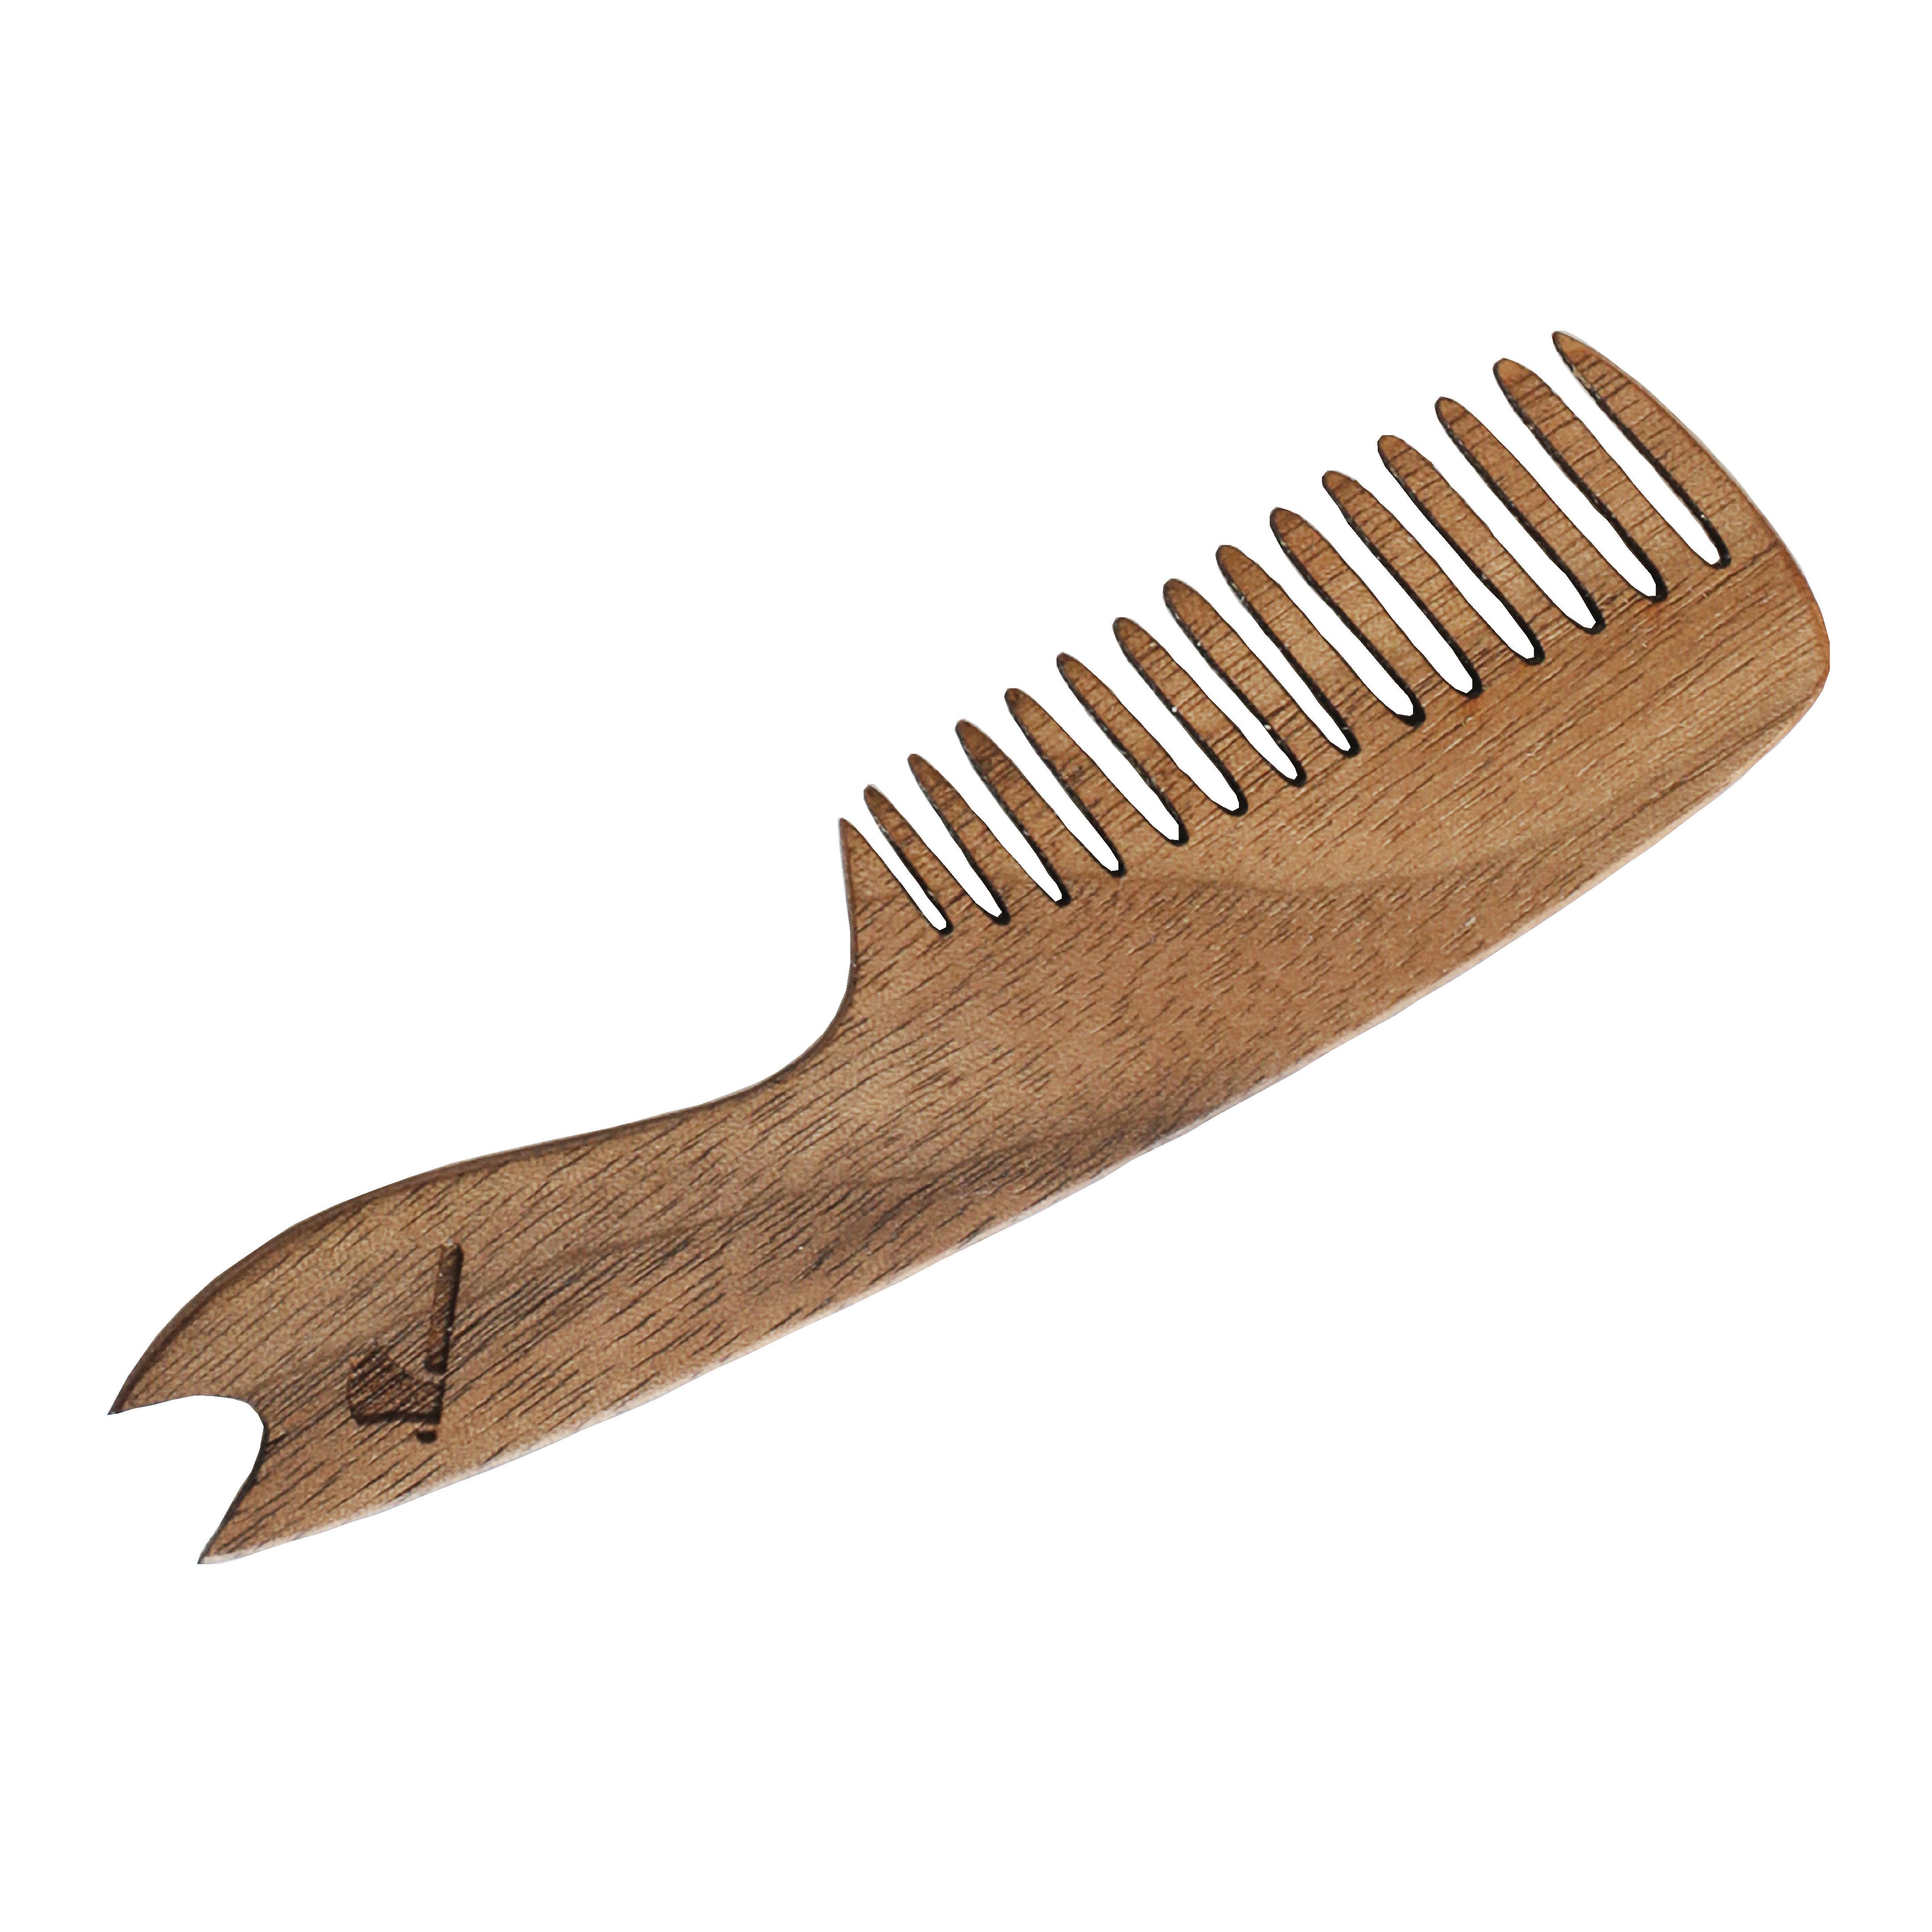 Beard and Mustache comb